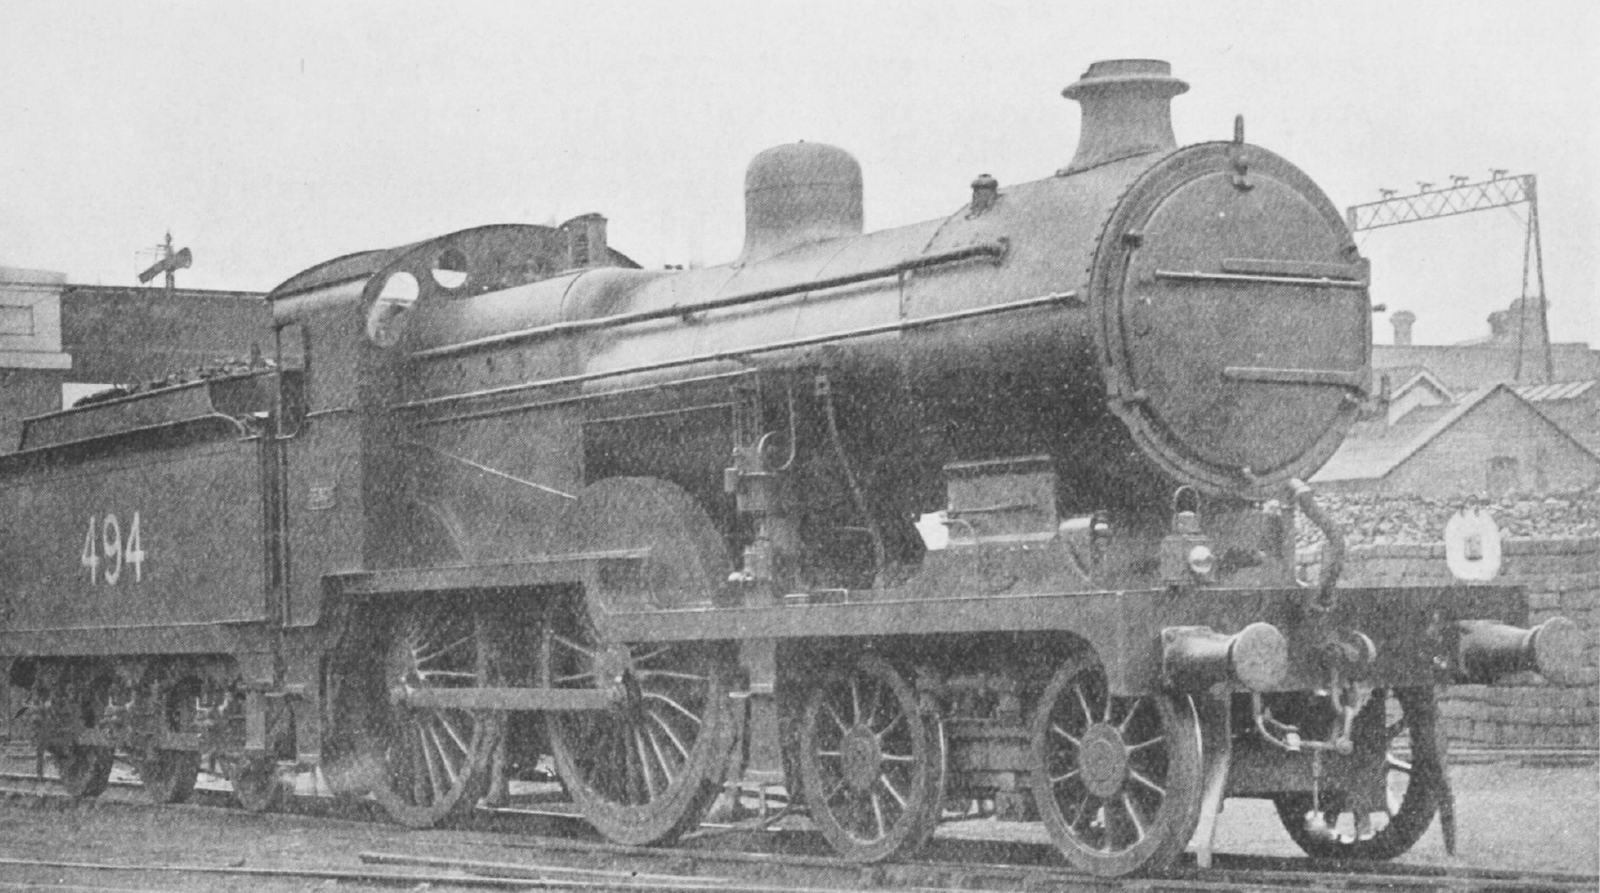 D1 No. 494 with Belpaire firebox